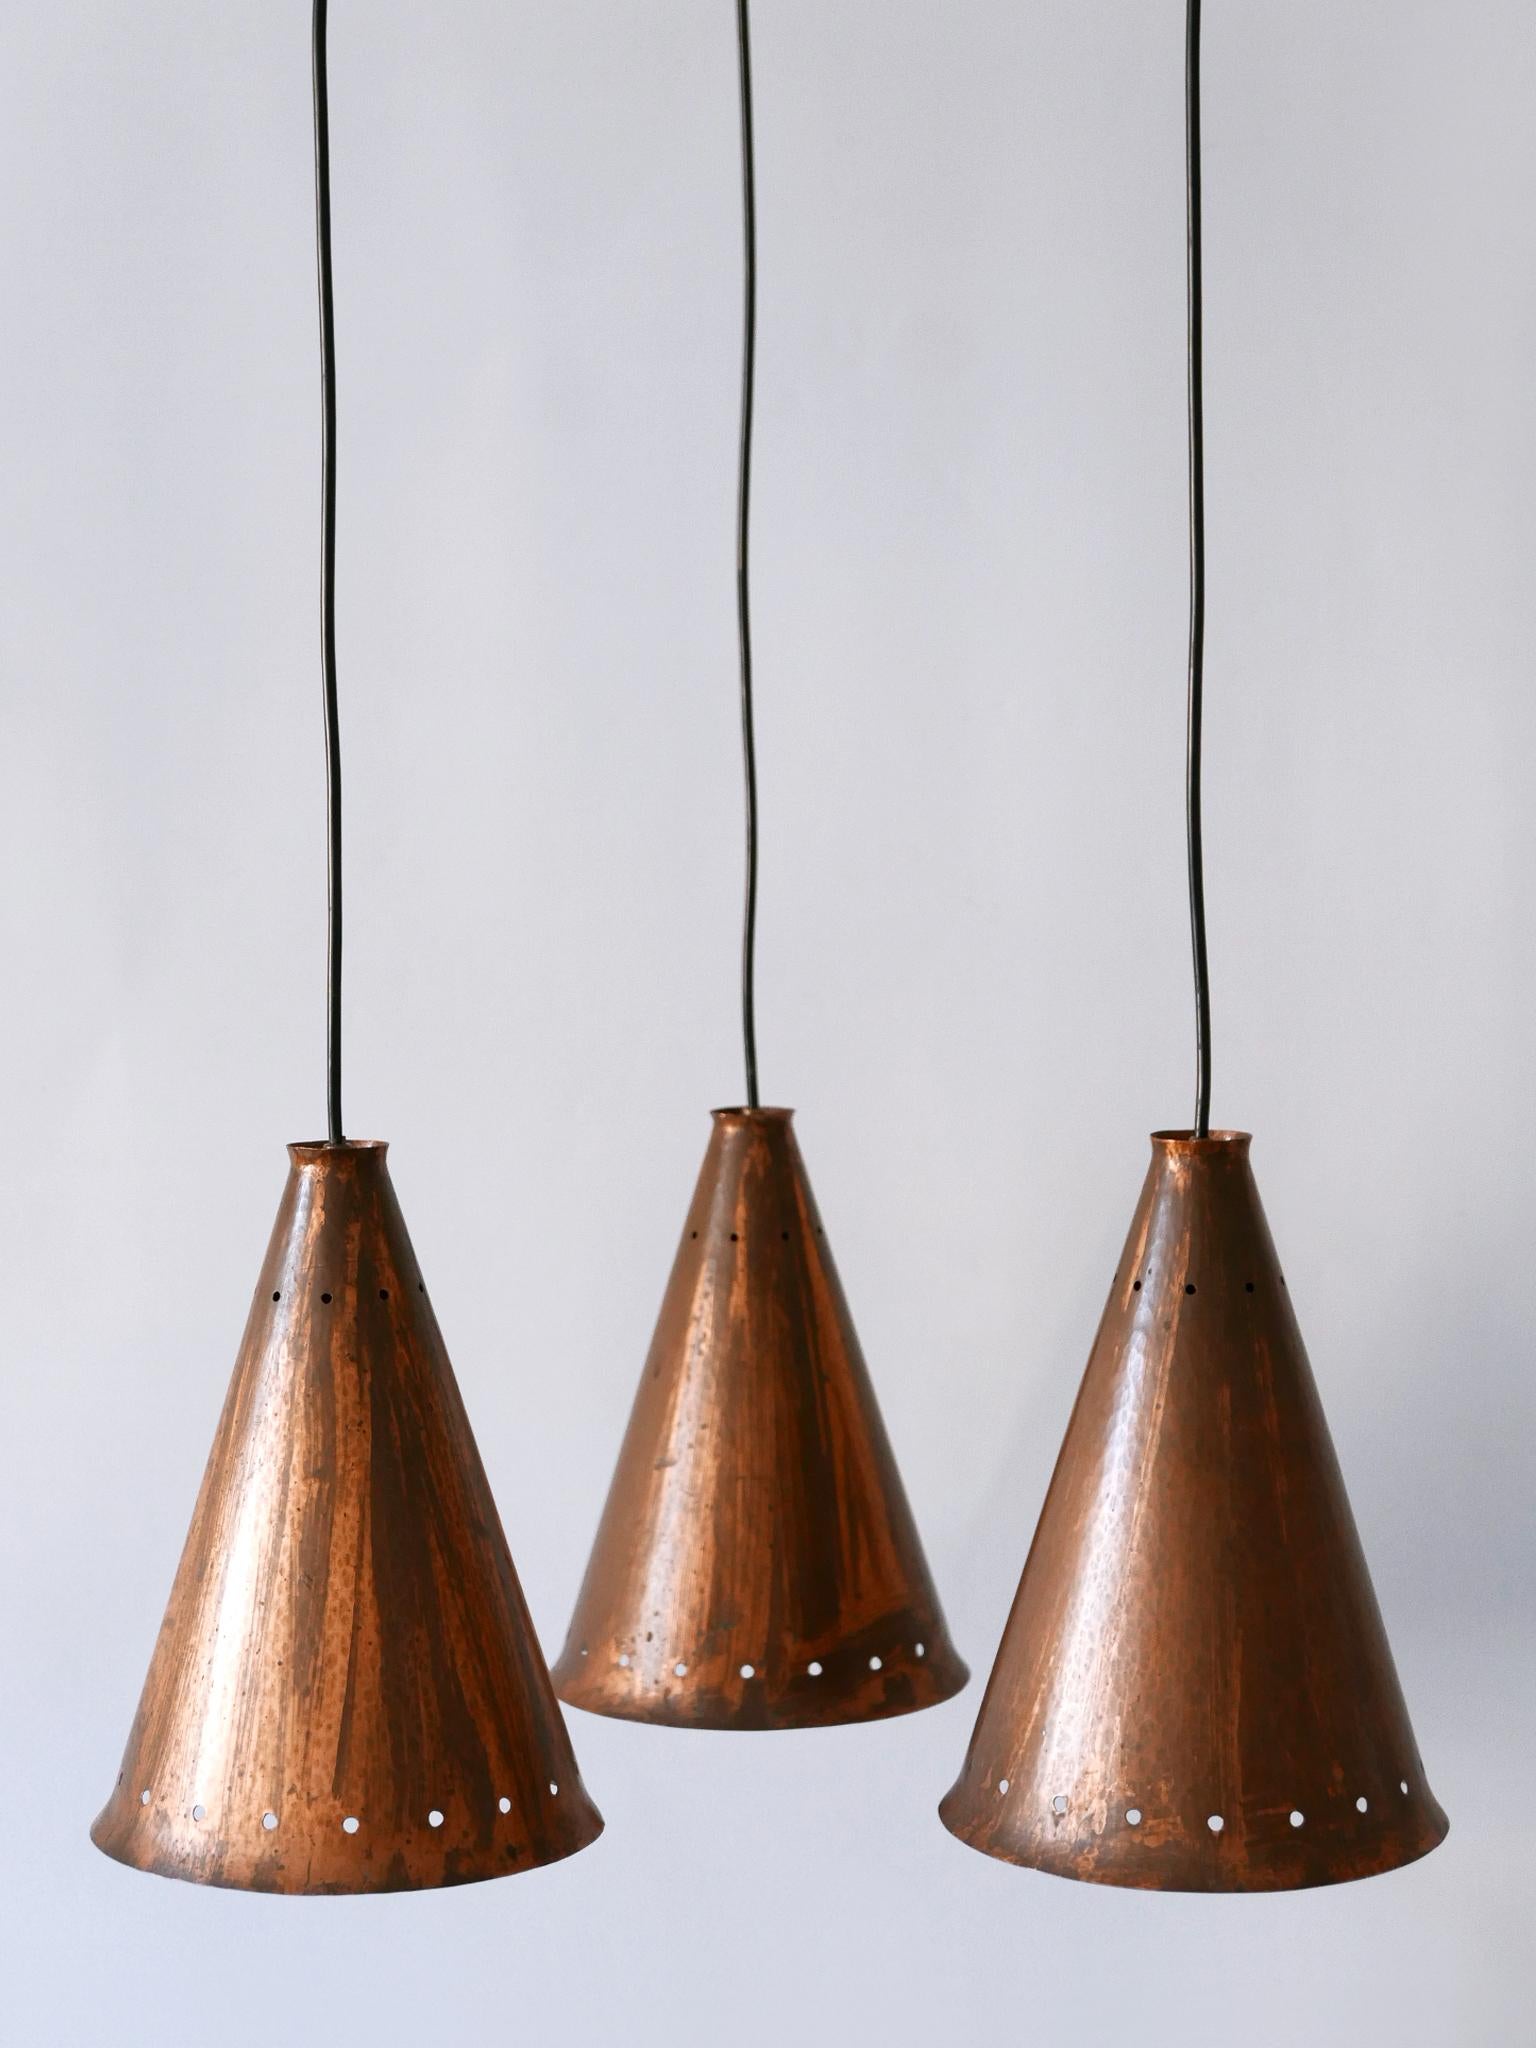 Exceptional & Large Mid-Century Modern Copper Pendant Lamp Scandinavia, 1950s For Sale 2